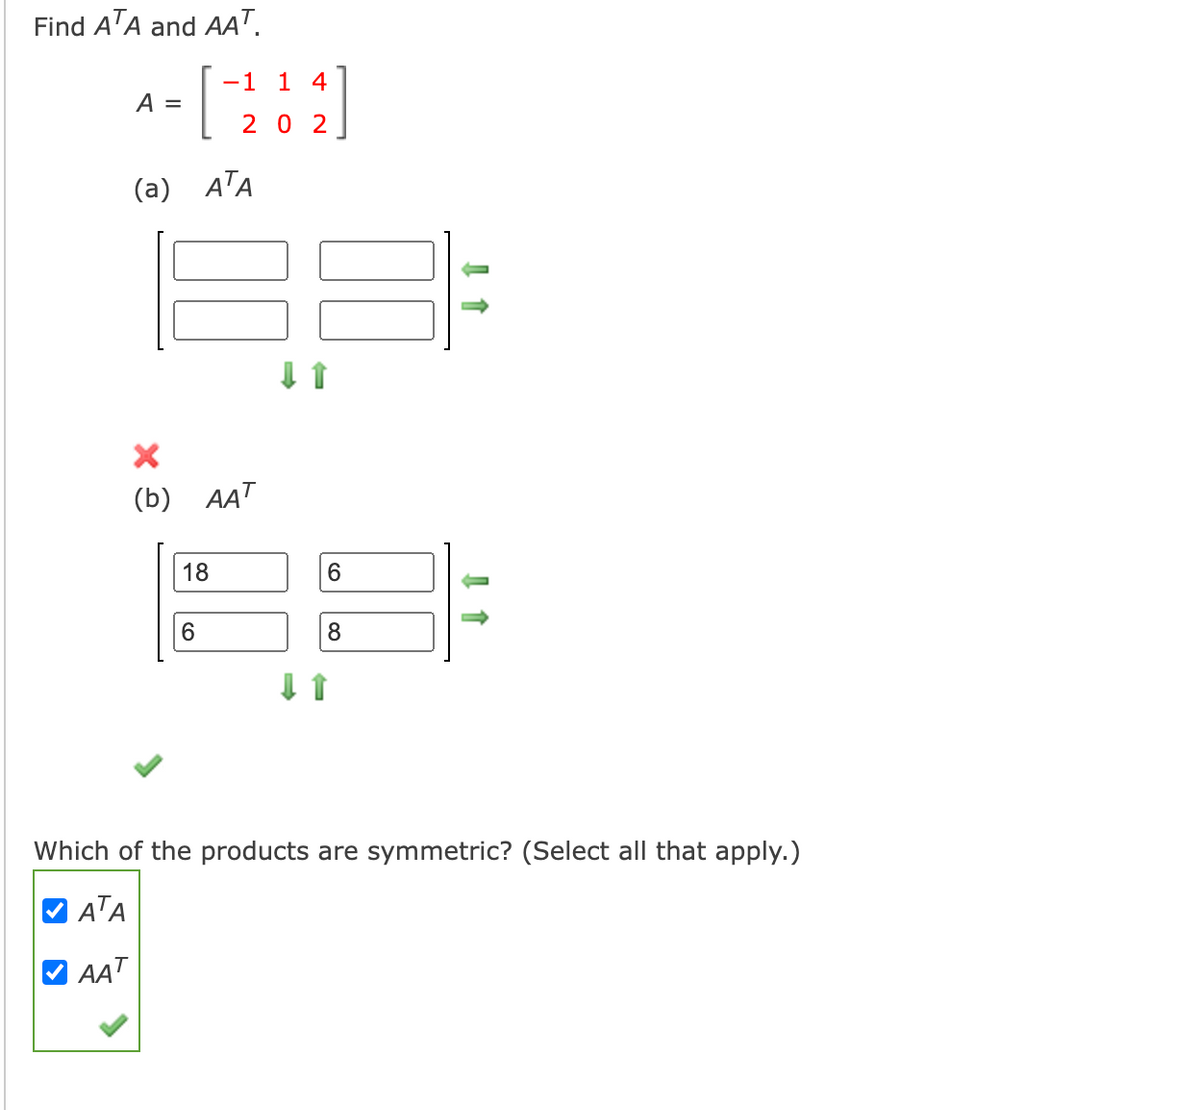 Find ATA and AAT.
-[
-1
1 4
A =
2 0 2
(a) ATA
(b) AAT
18
6.
8
Which of the products are symmetric? (Select all that apply.)
ATA
AAT
